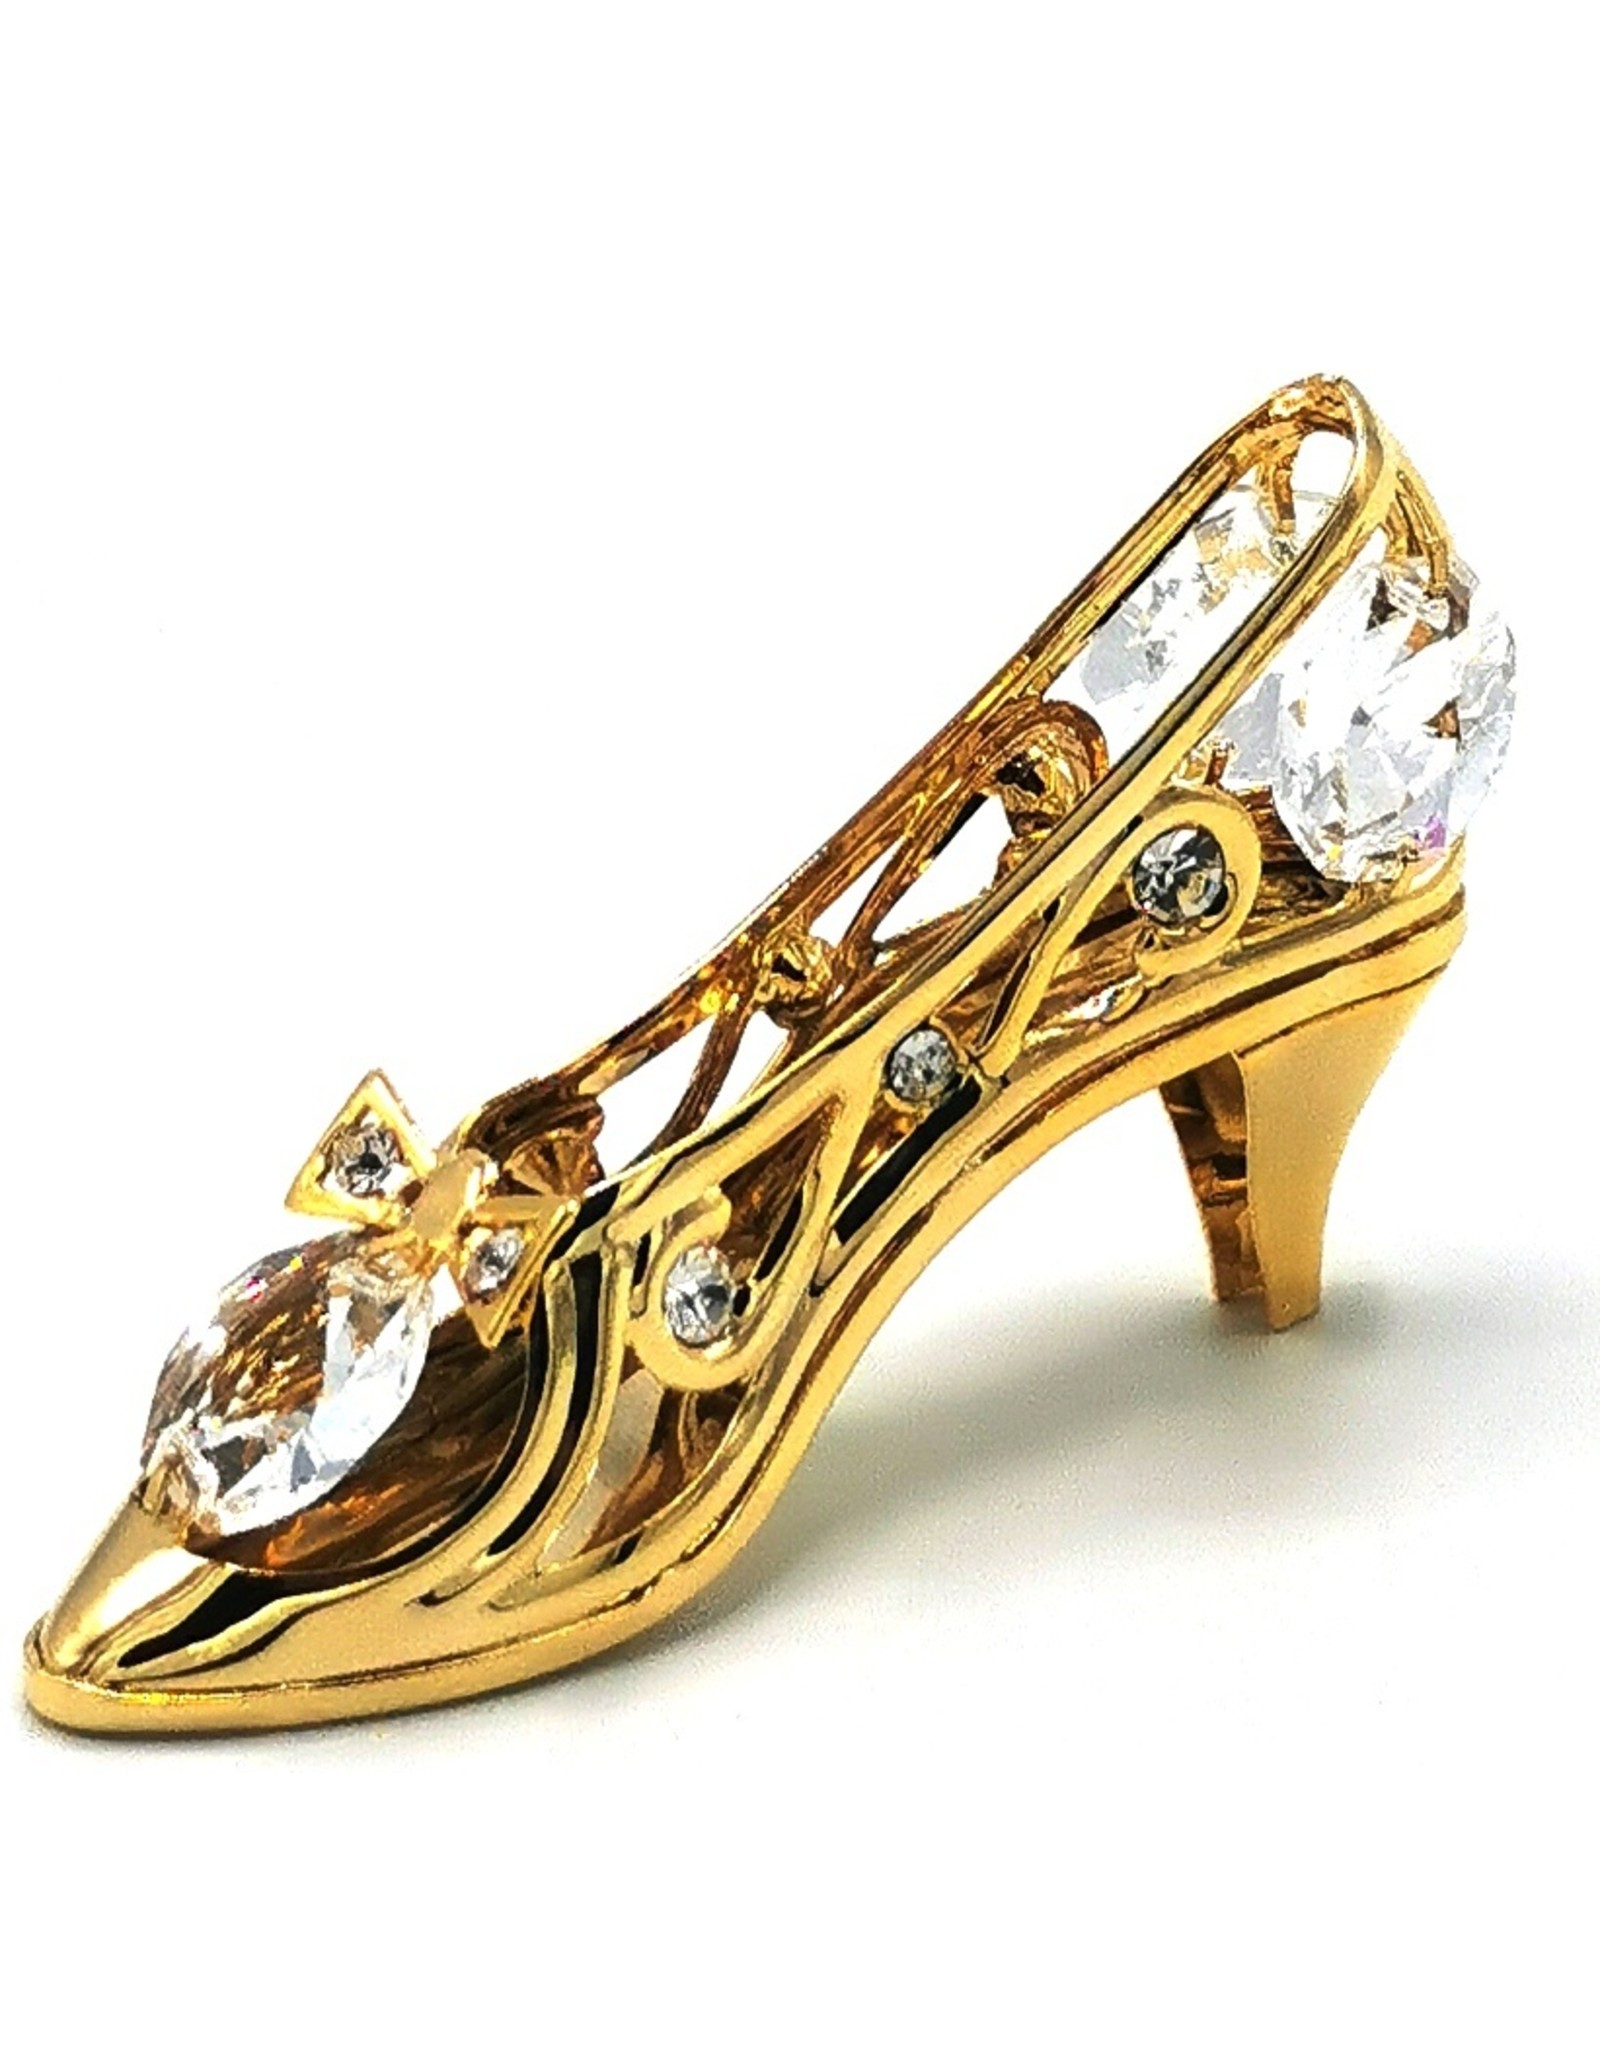 Crystal Temptations Miscellaneous - Miniature Ladies shoe. Gold-plated and with Swarovski